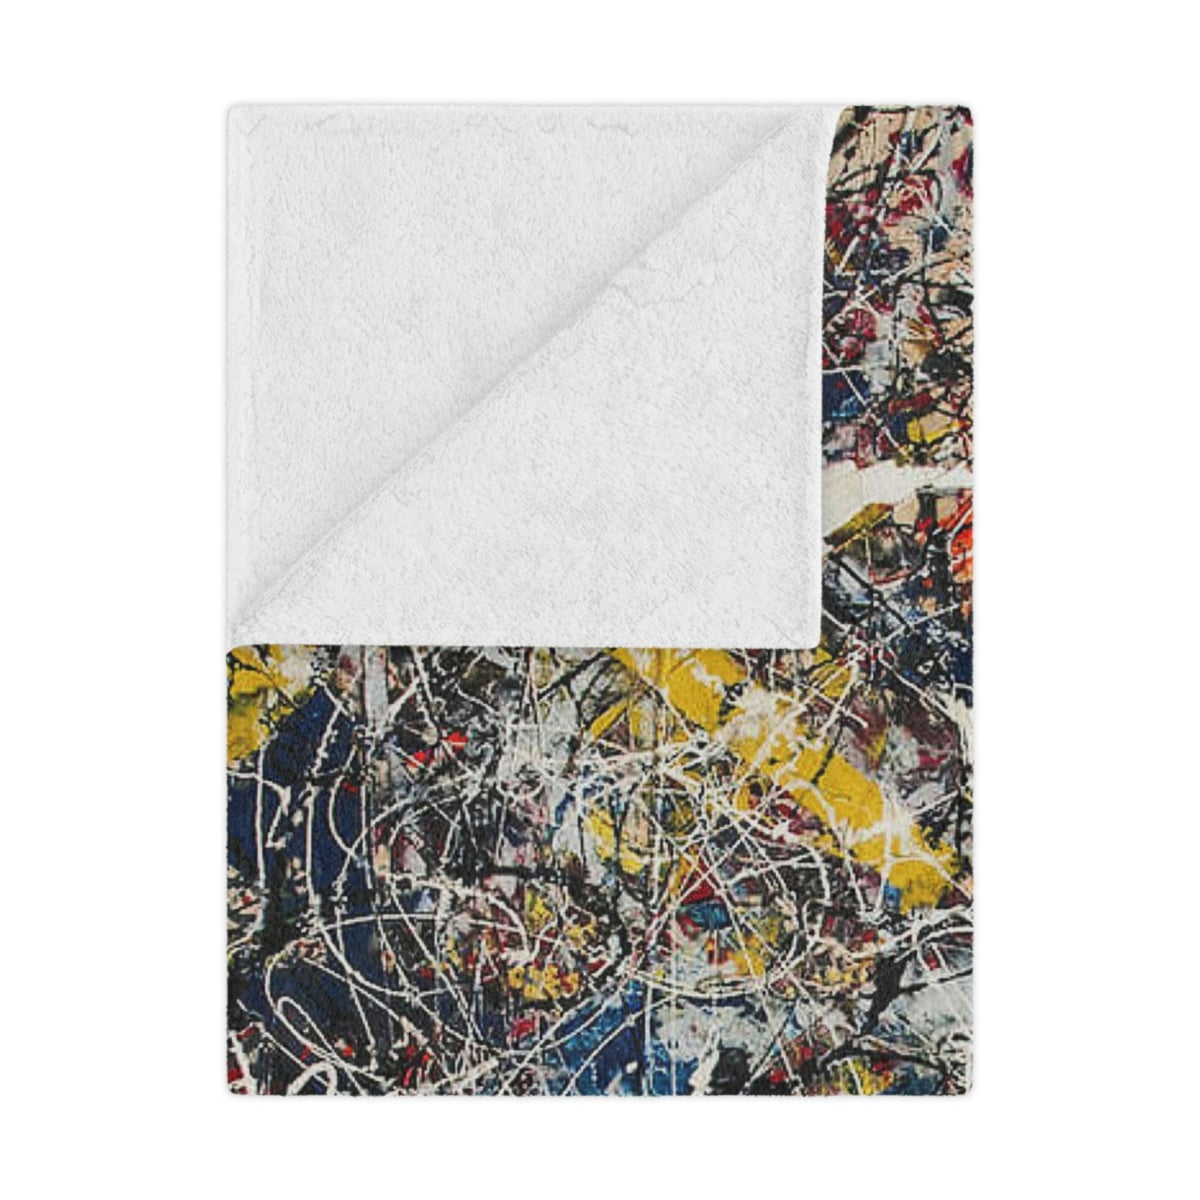 Enhance Your Decor with Number 17A Jackson Pollock Blanket